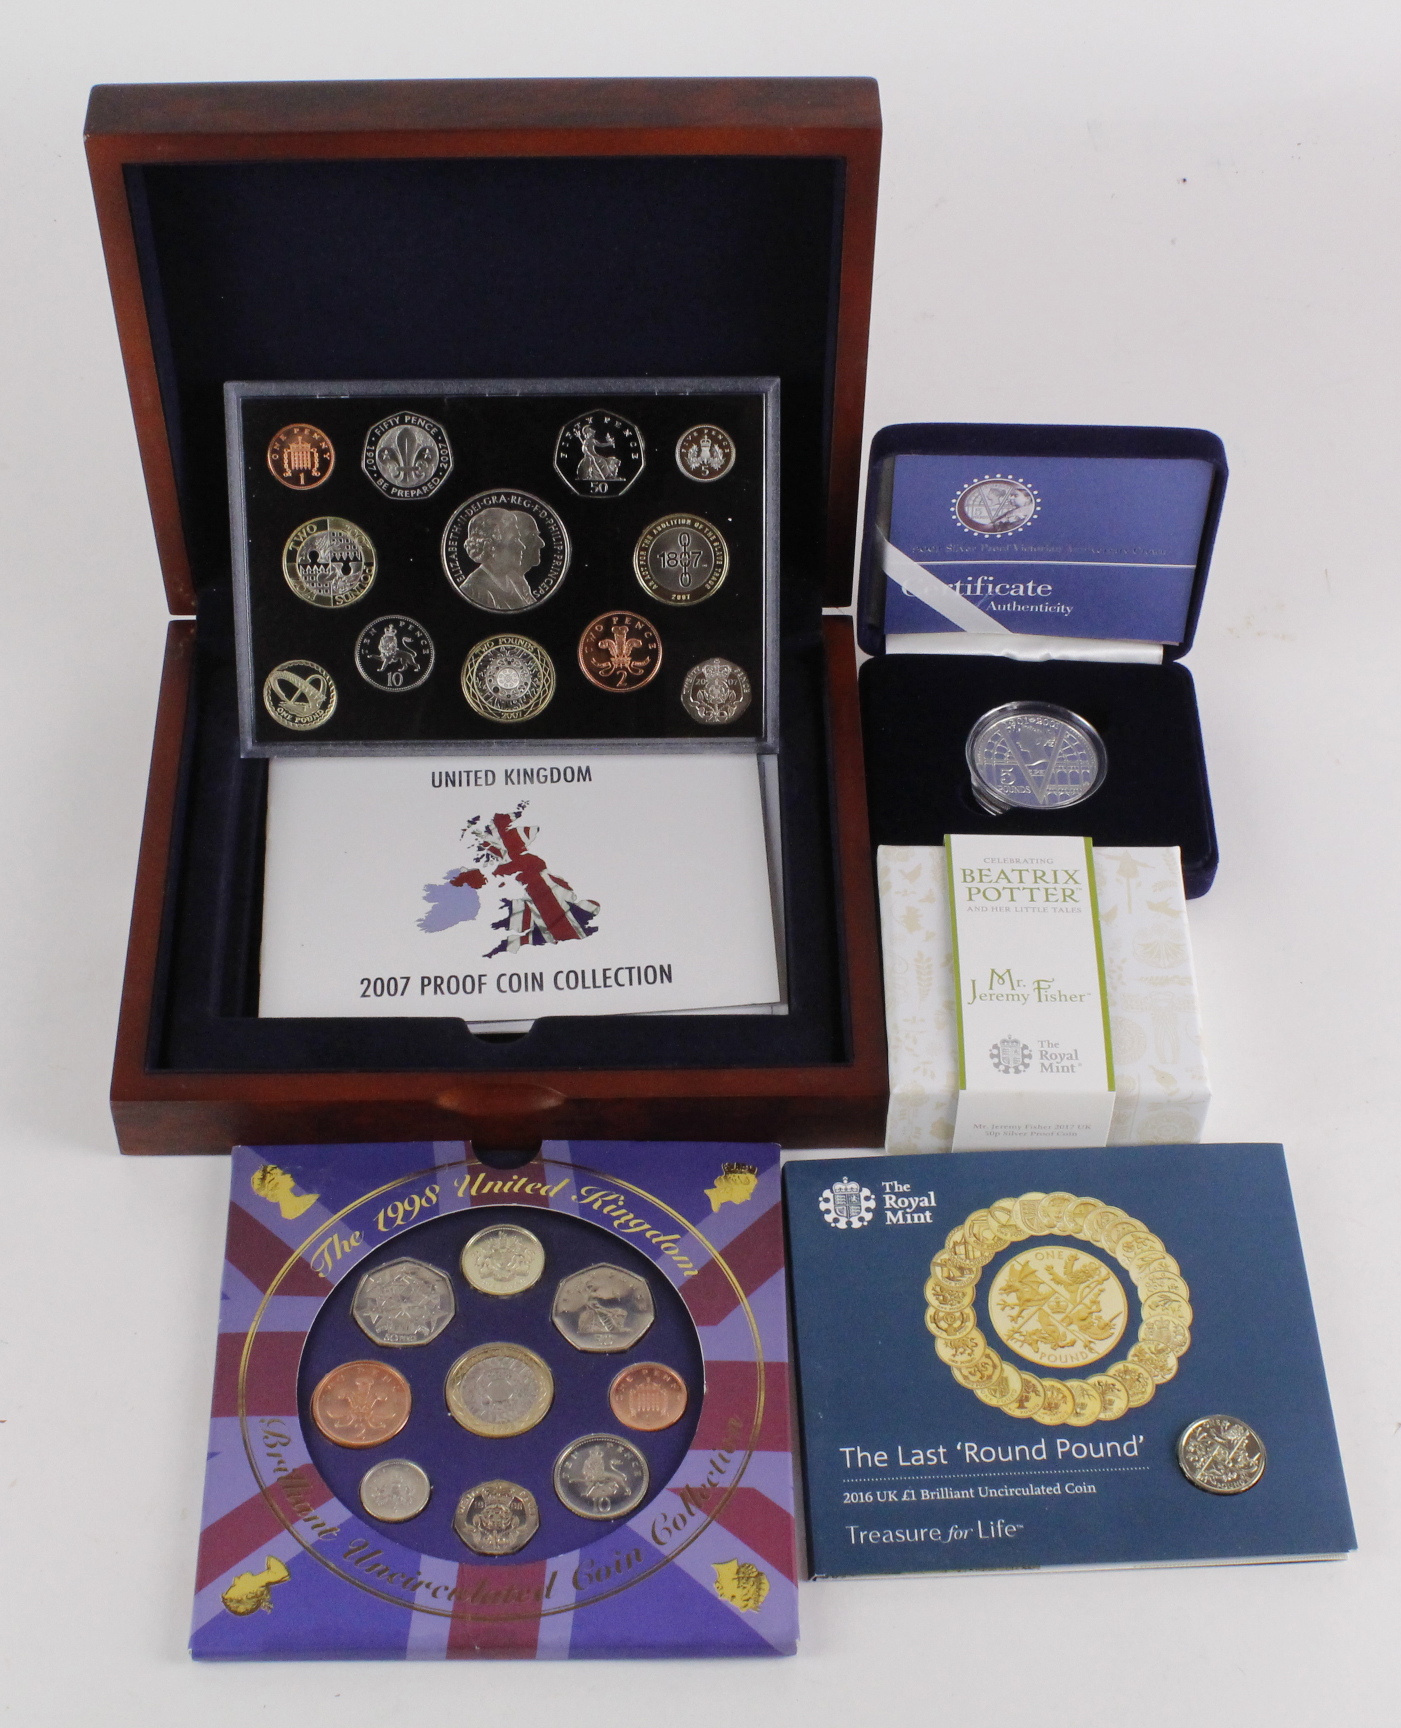 GB Commemorative Coins & Sets: Royal Mint Executive Proof Collection (wooden case) 2007 aFDC cased